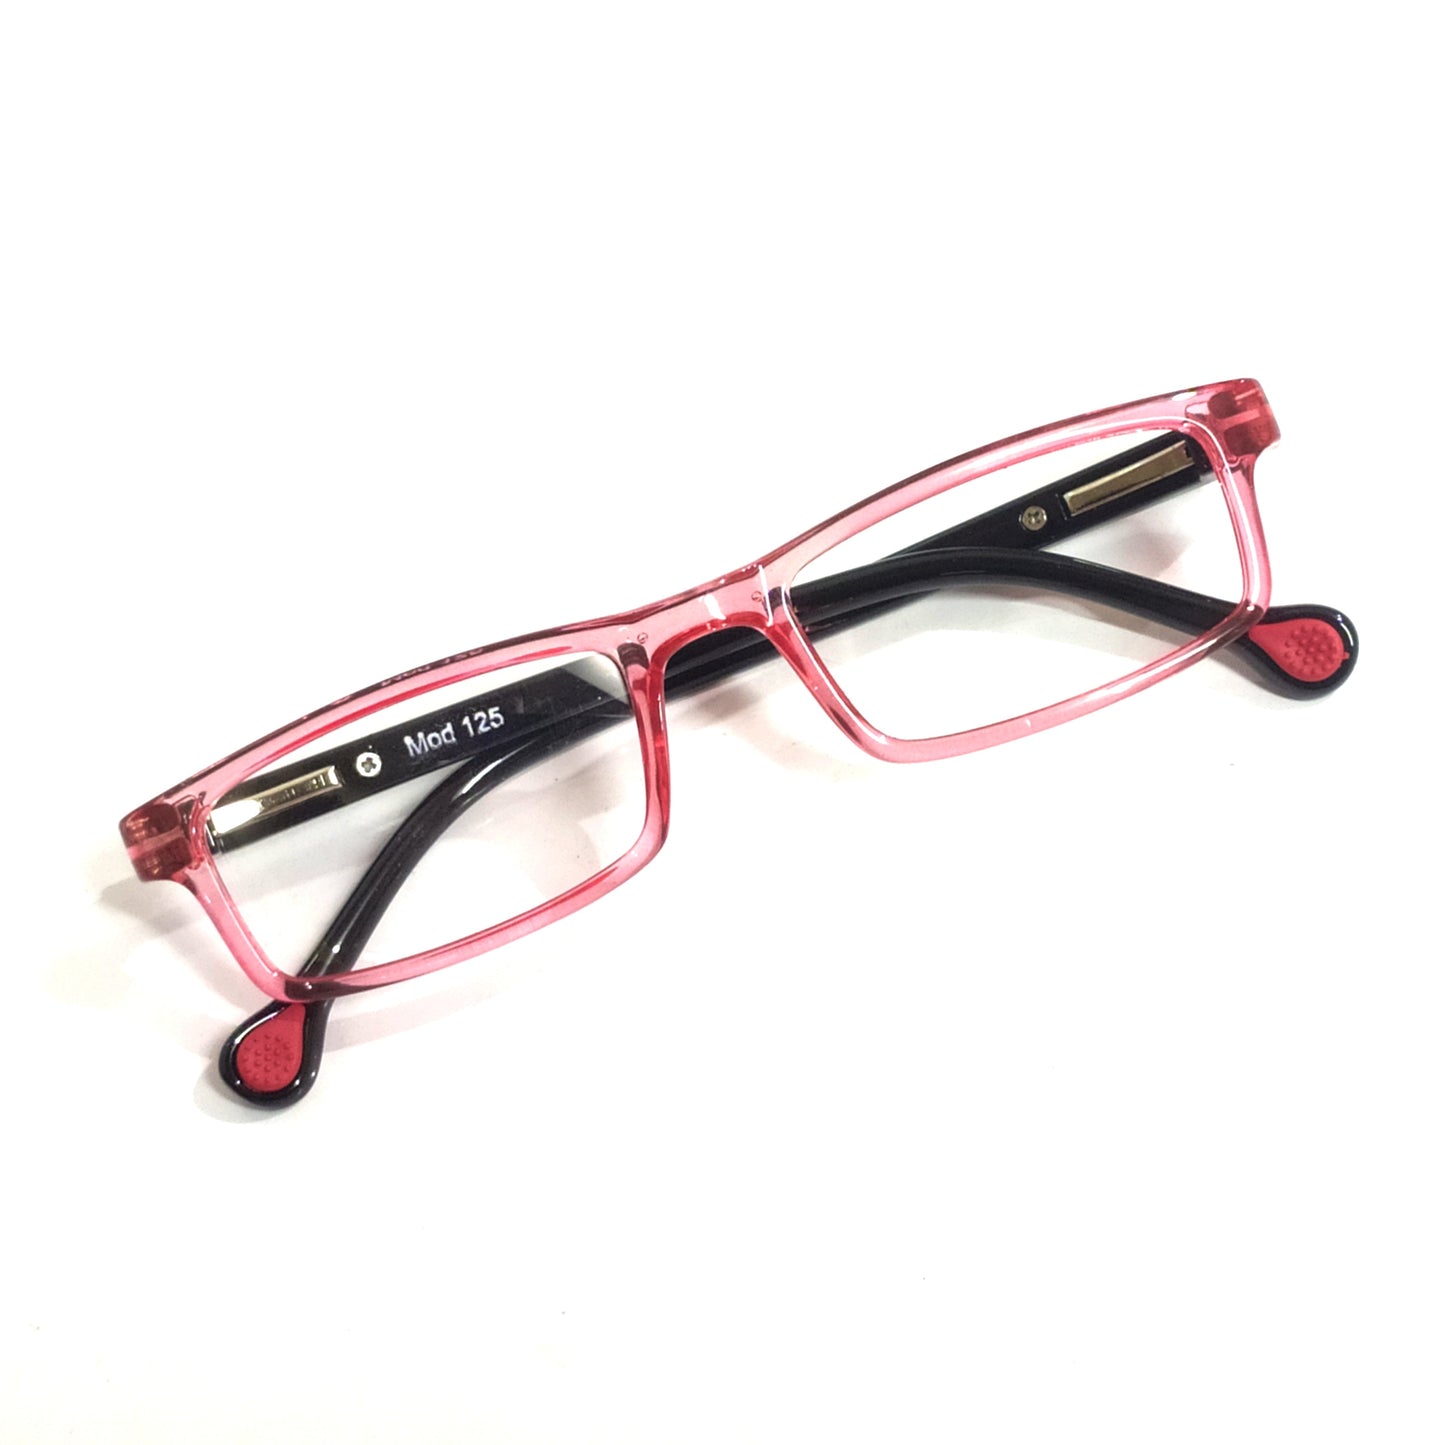 Red Kids Spectacle Frames for 2-3 Years Old